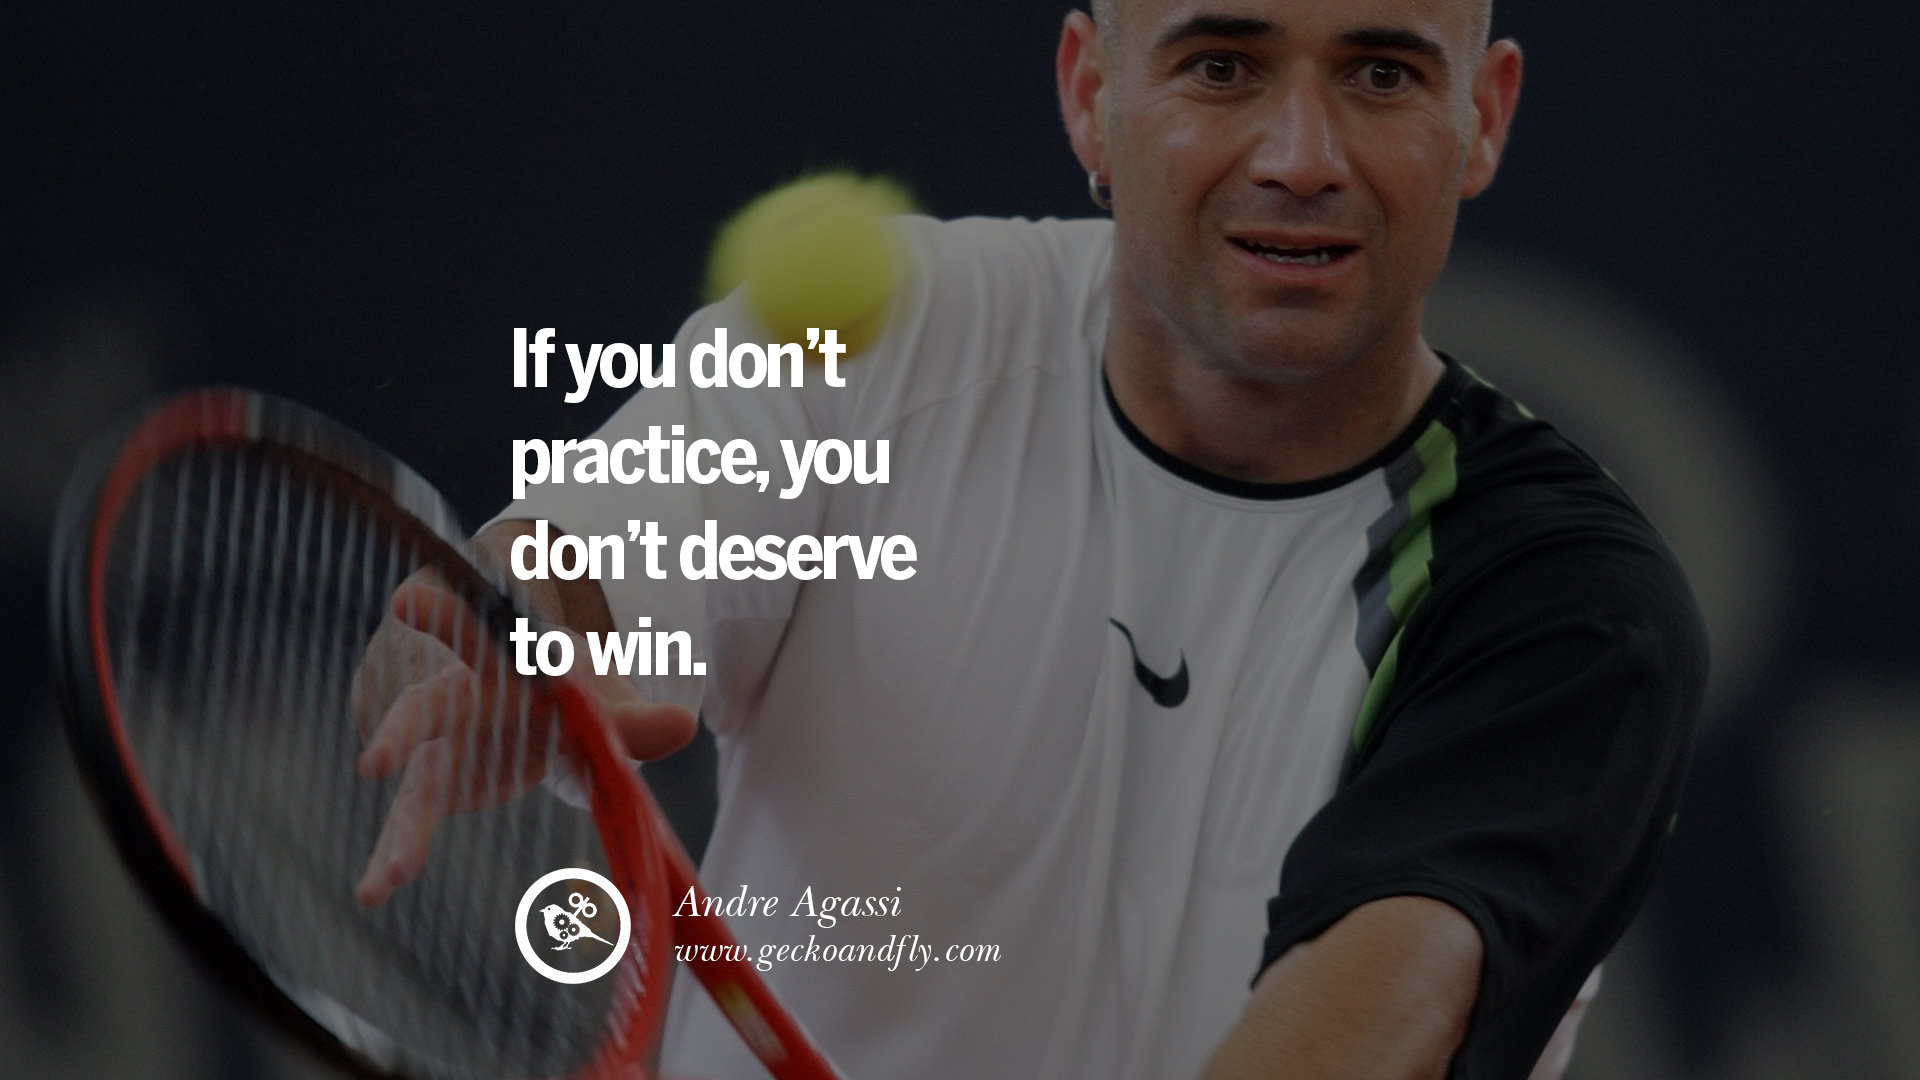 31 Inspirational Quotes By Olympic Athletes On The Spirit Of Sportsmanship